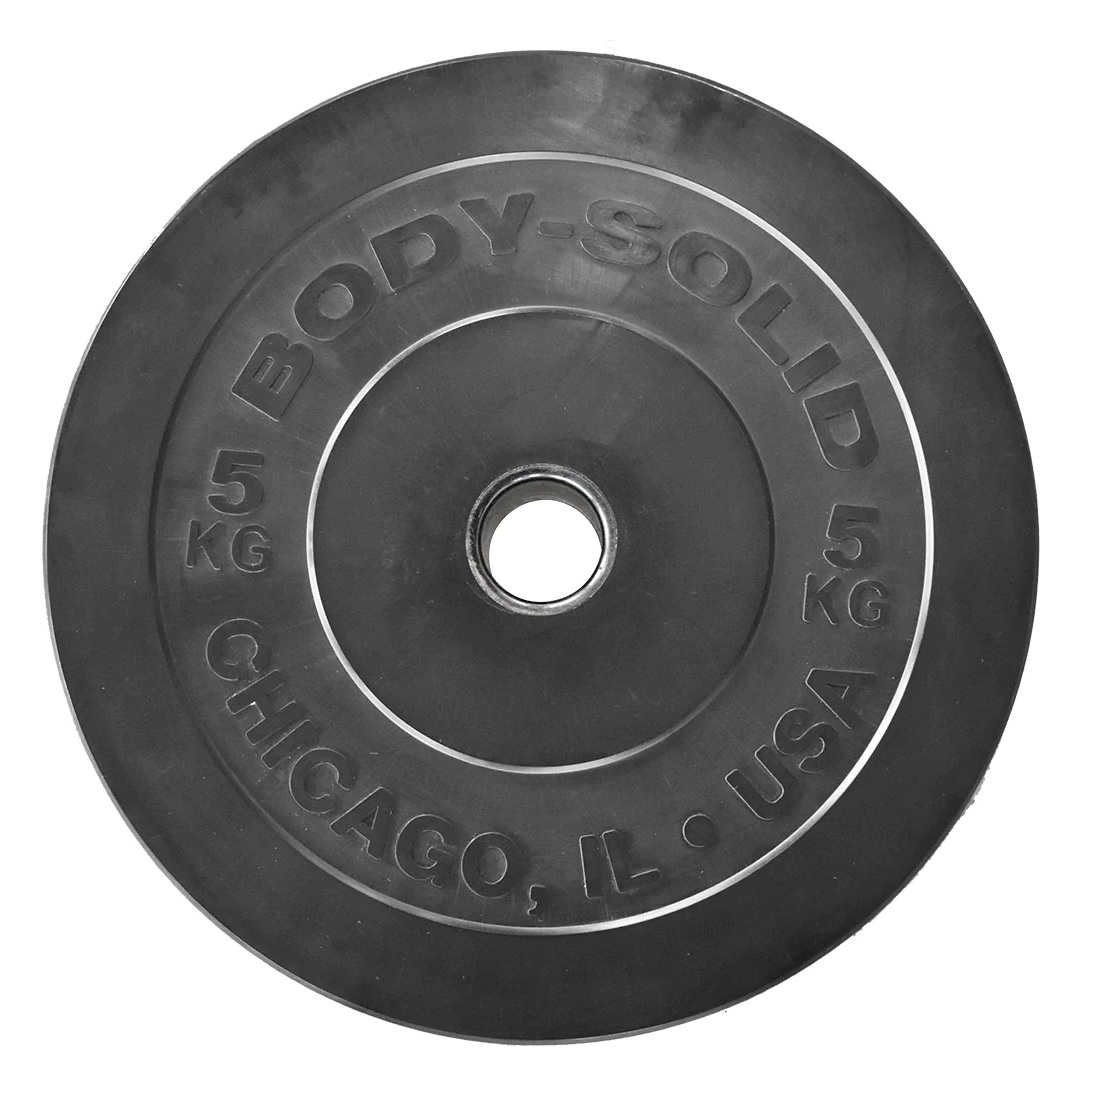 Bodysolid Chicago Olympic Bumper Plate 5 kg